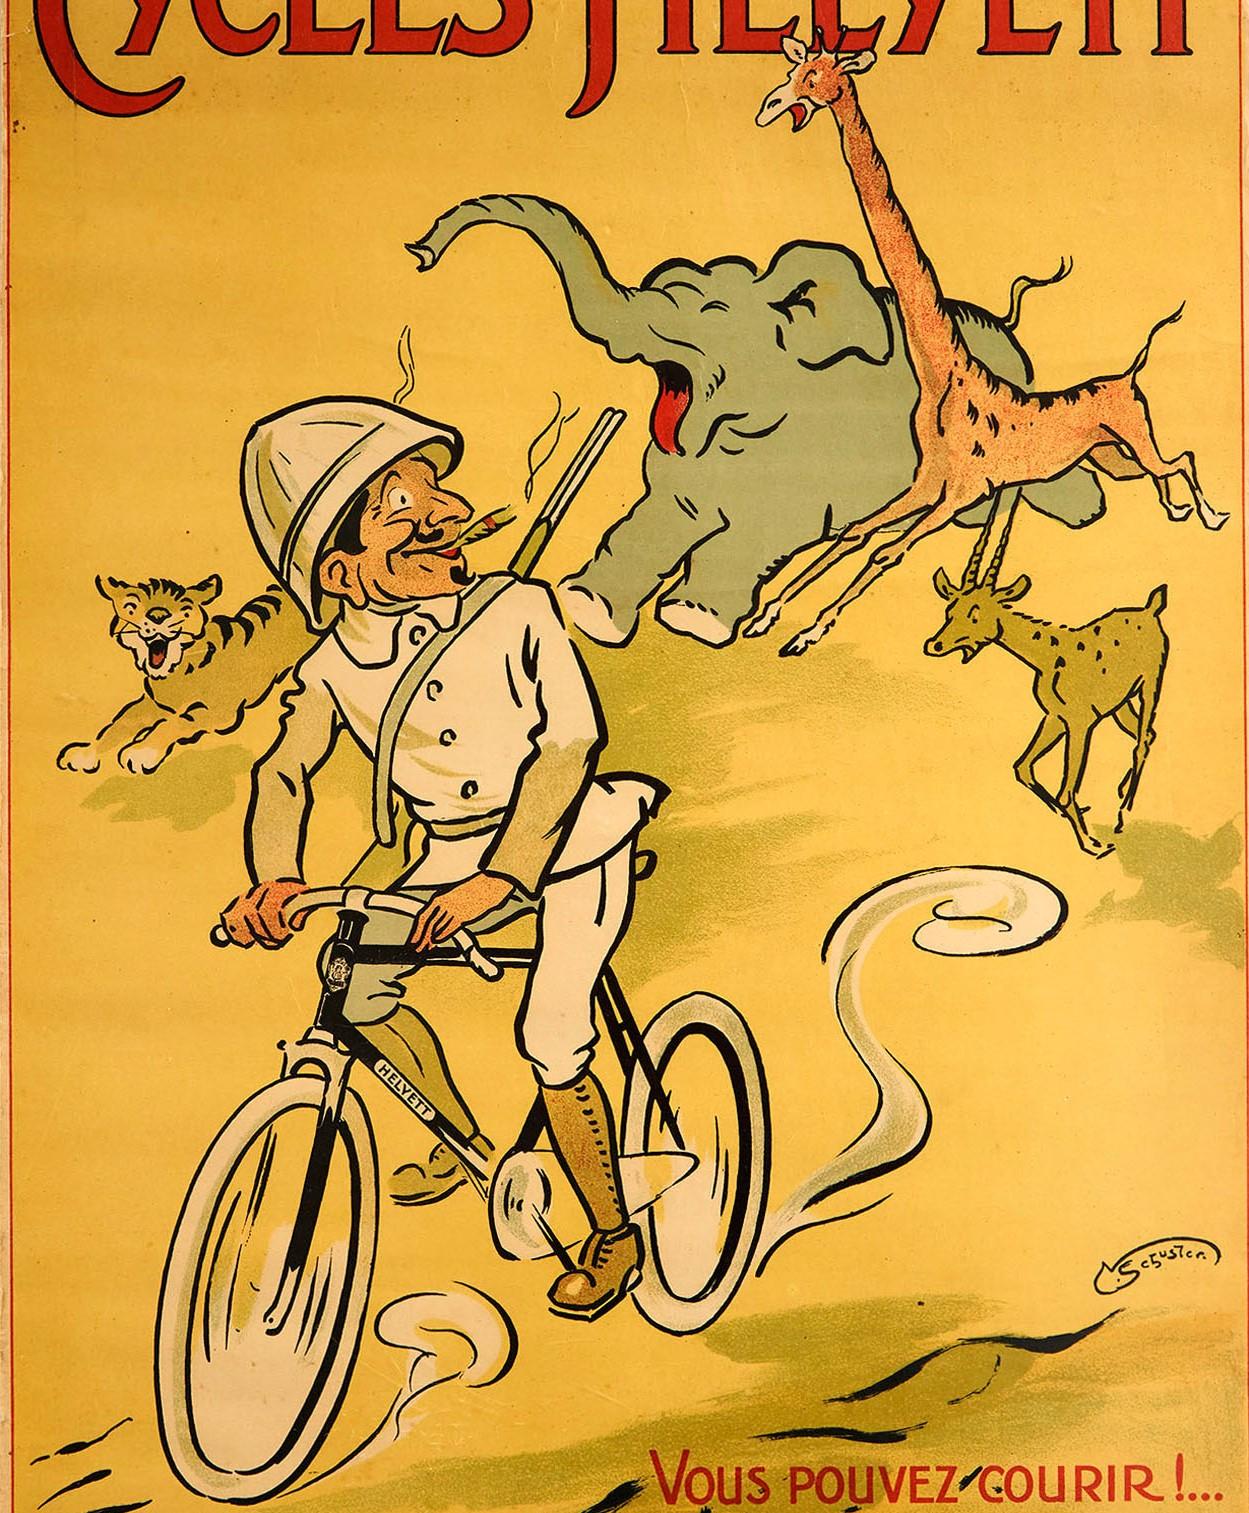 Early 20th Century Original Antique Poster Cycles Helyett French Bicycle Safari Animals Design Art